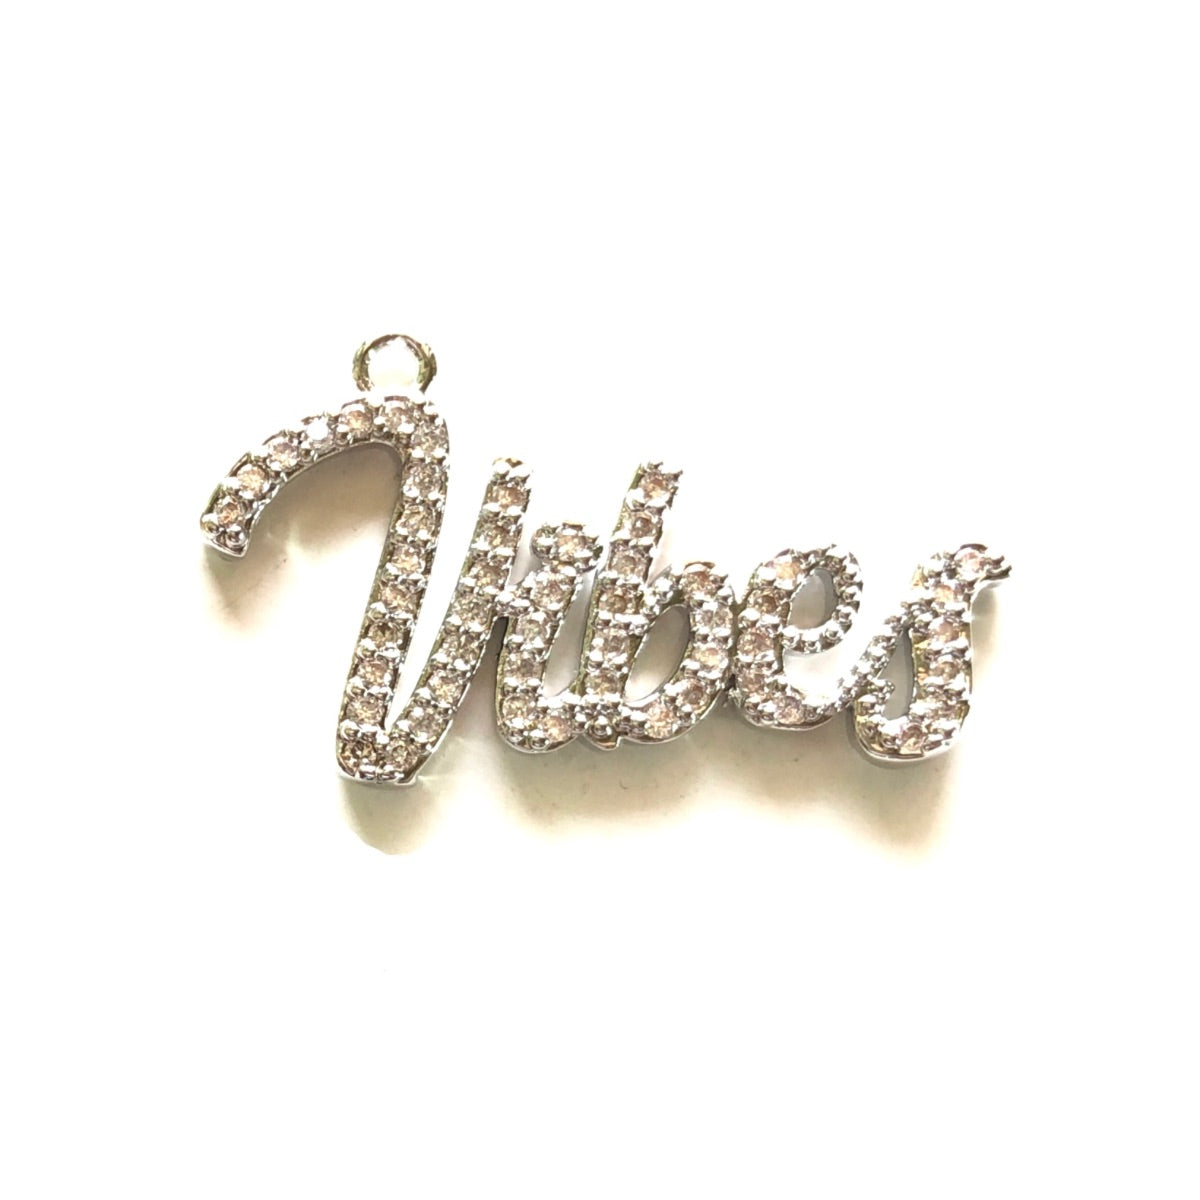 10pcs/lot 32.5*19mm CZ Paved Vibes Word Charms Silver CZ Paved Charms On Sale Words & Quotes Charms Beads Beyond